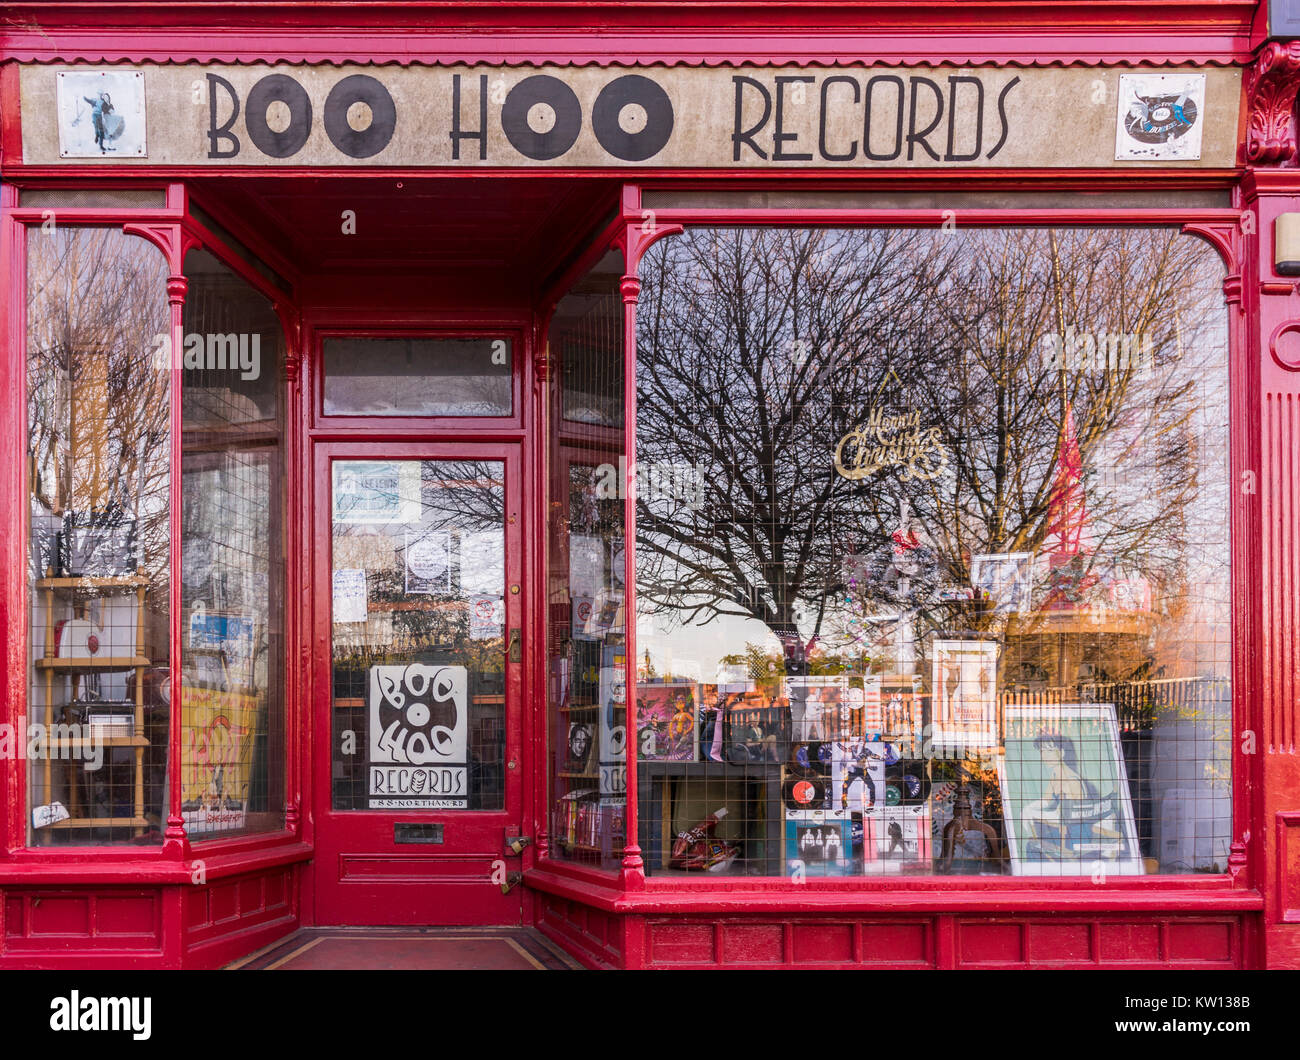 Shop front of 'Boo Hoo Records' vintage record store along Northam Road, Northam, Southampton, UK Stock Photo